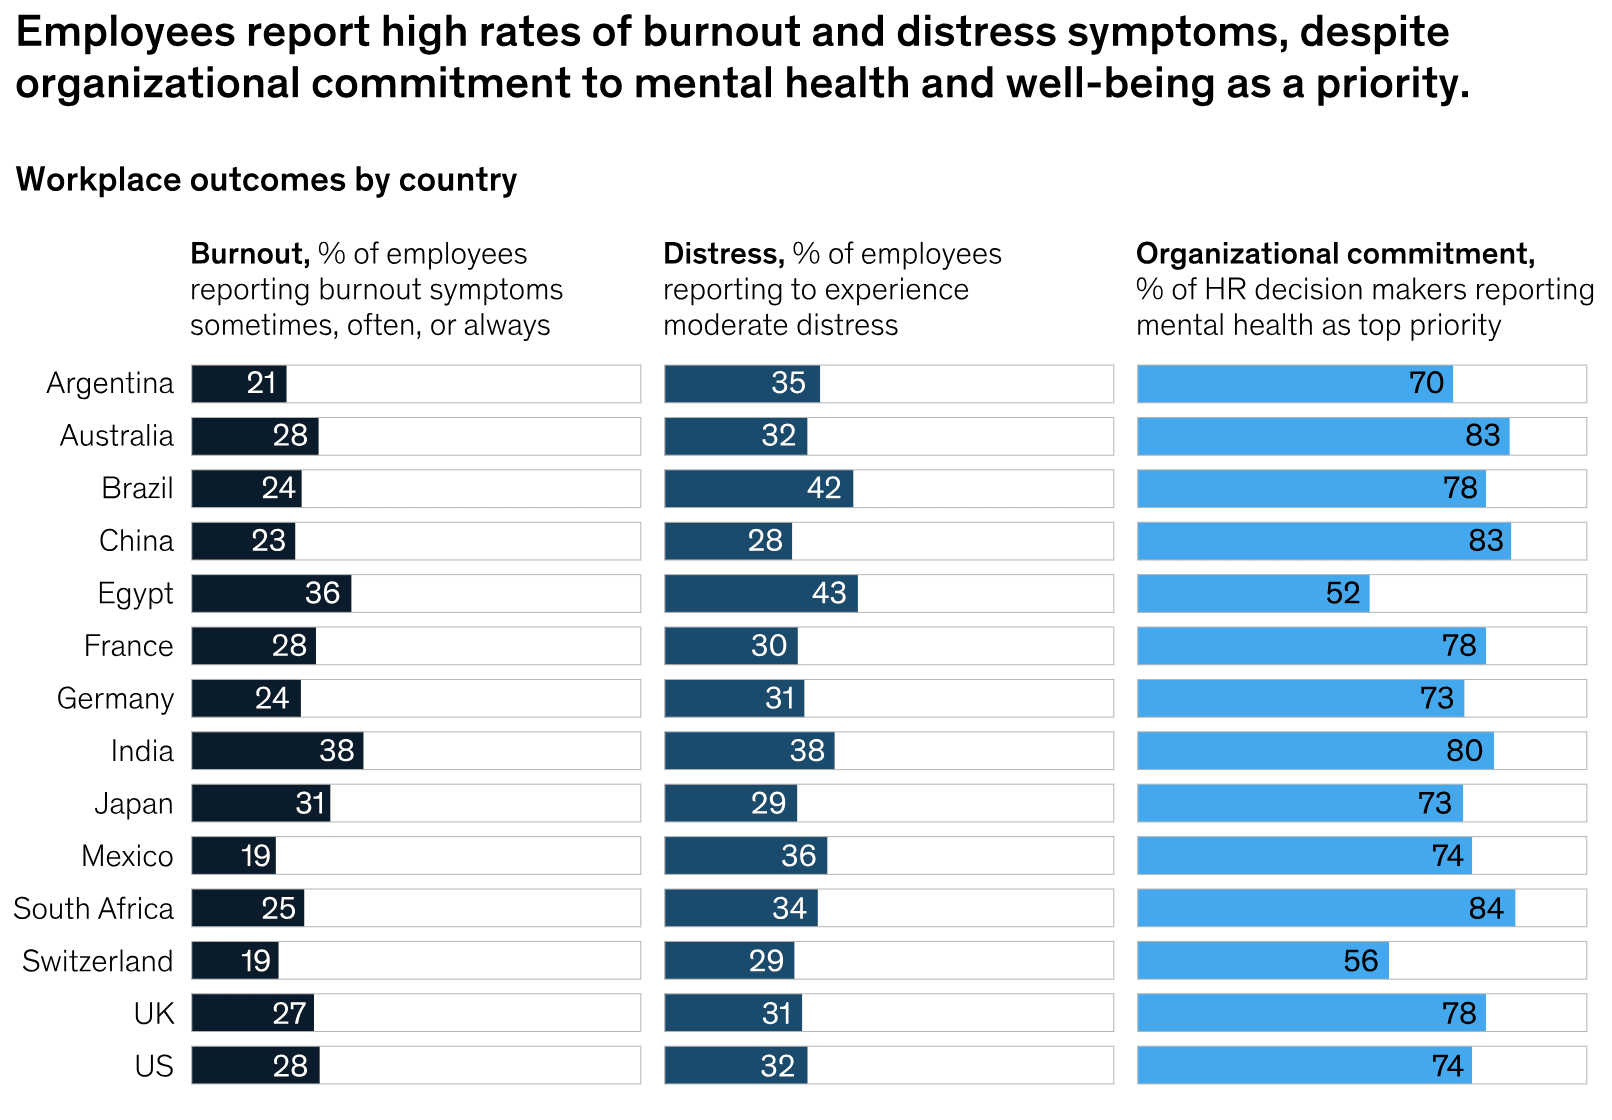 Employee burnout by country, with India reporting the highest percentage of burnout. 